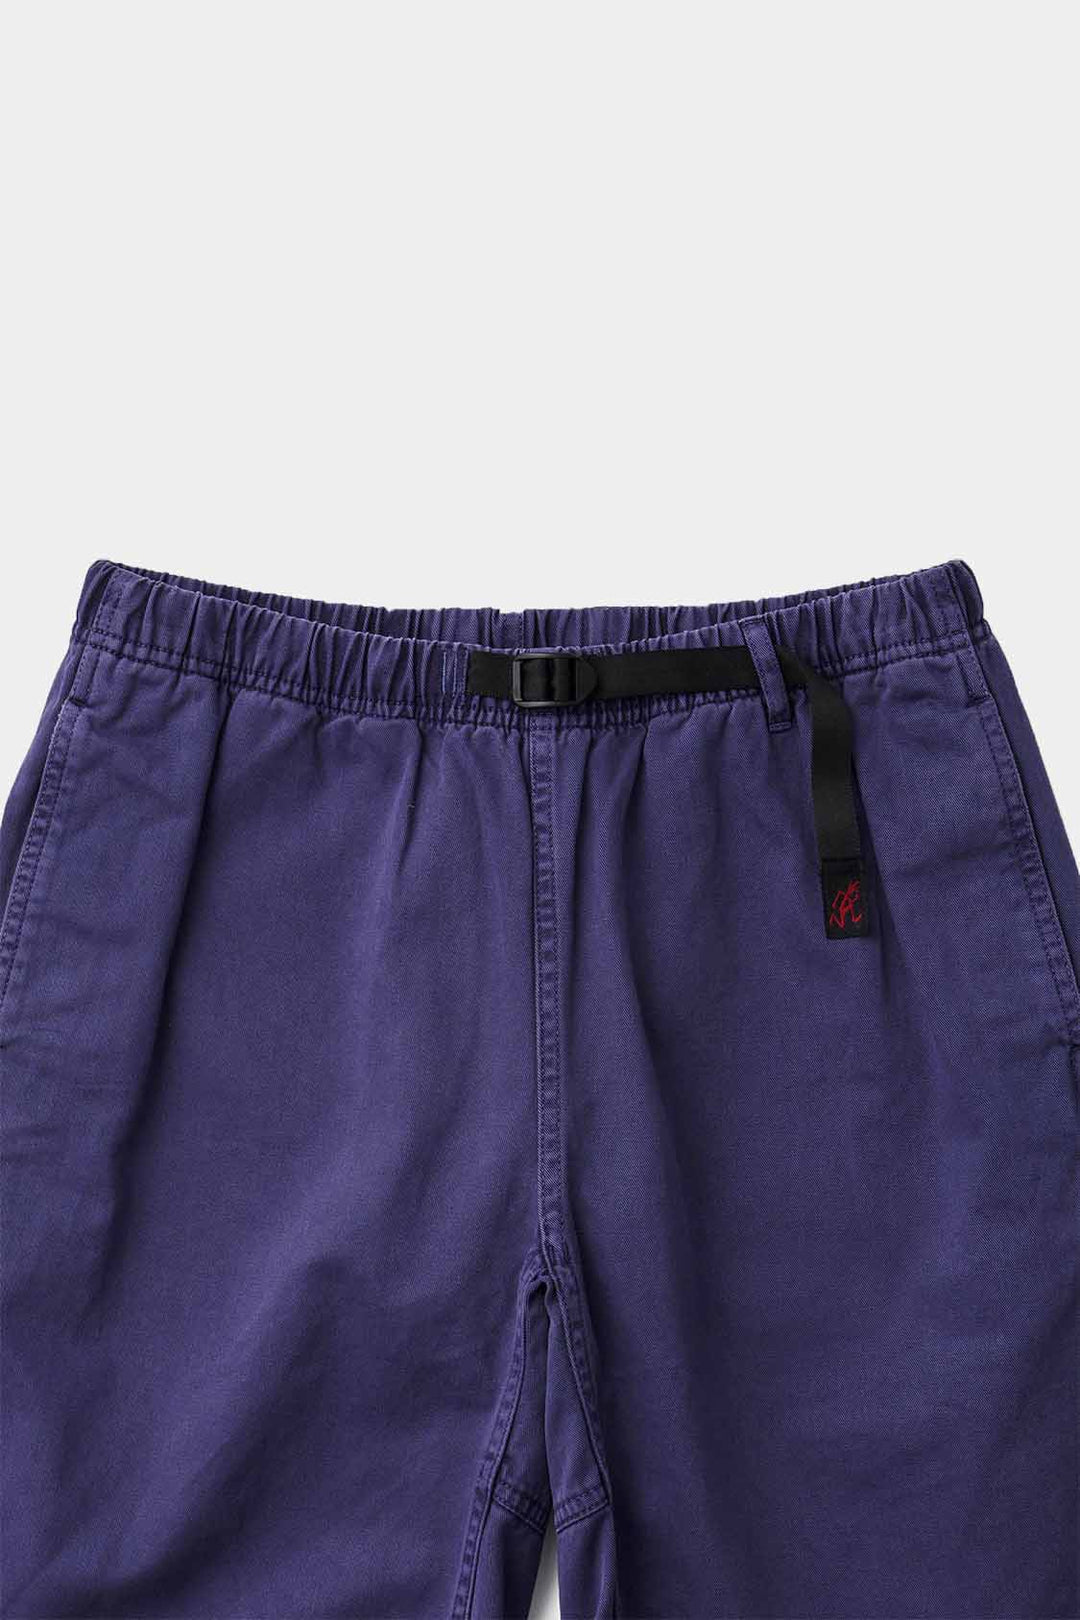 Gramicci G-Short Pigment Dyed